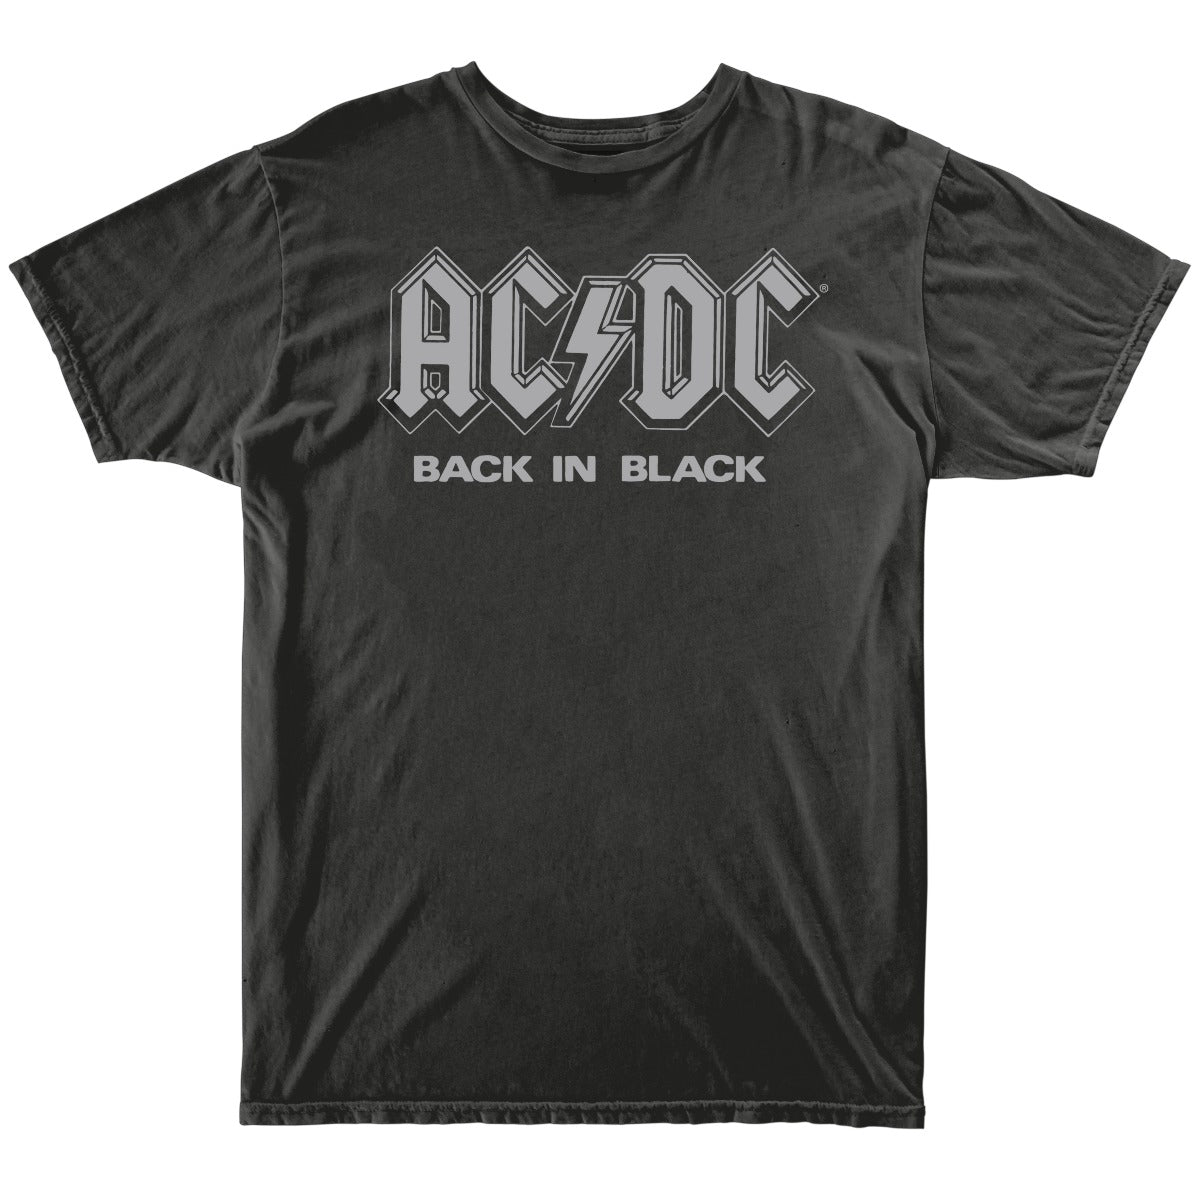 Classic AC/DC bolt logo with Back in Black below all in silver on the 100% cotton Black Label tee in vintage black color.